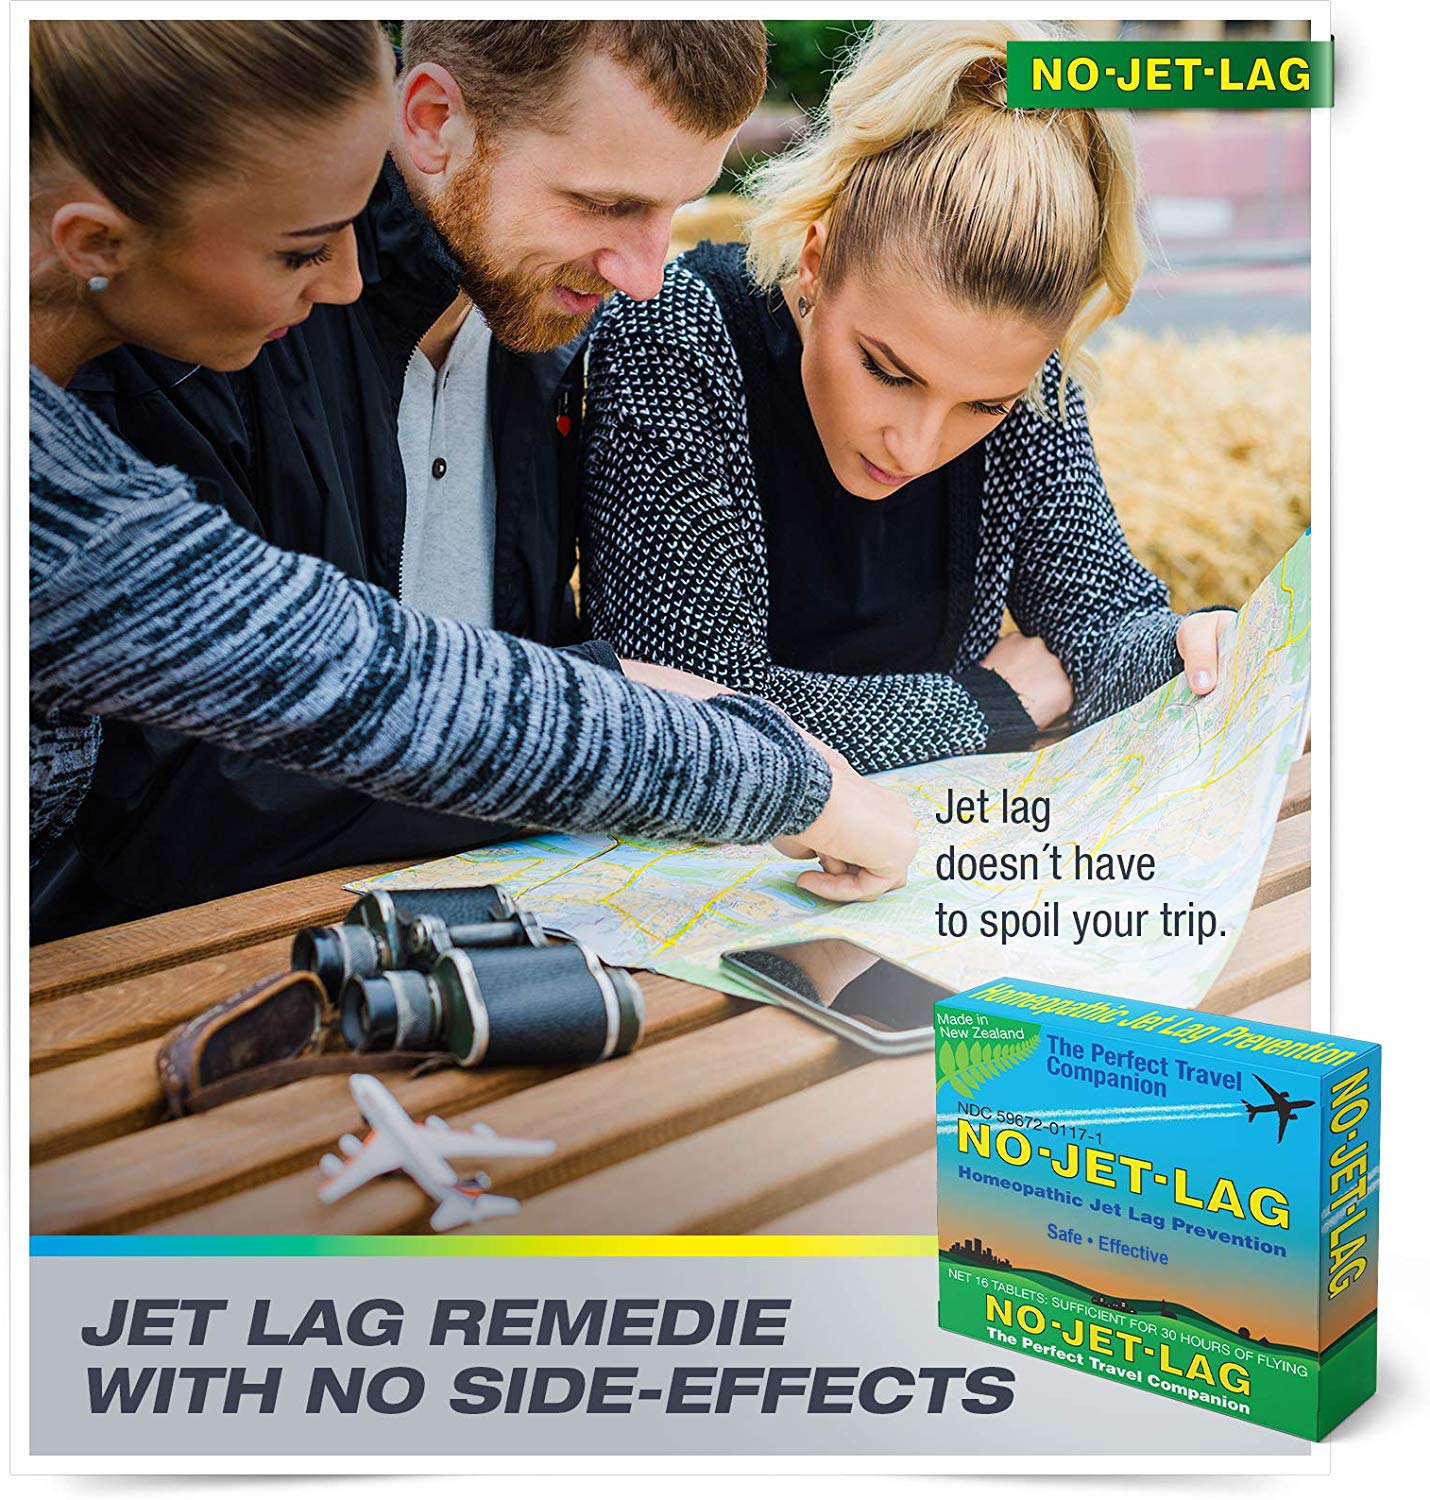 Miers Laboratories No Jet Lag Homeopathic Jet Lag Remedy (1 Pack, 32 Chewable Tablets), Travel Must Have, Flight Essential for Jet Lag Relief, Plant-Based